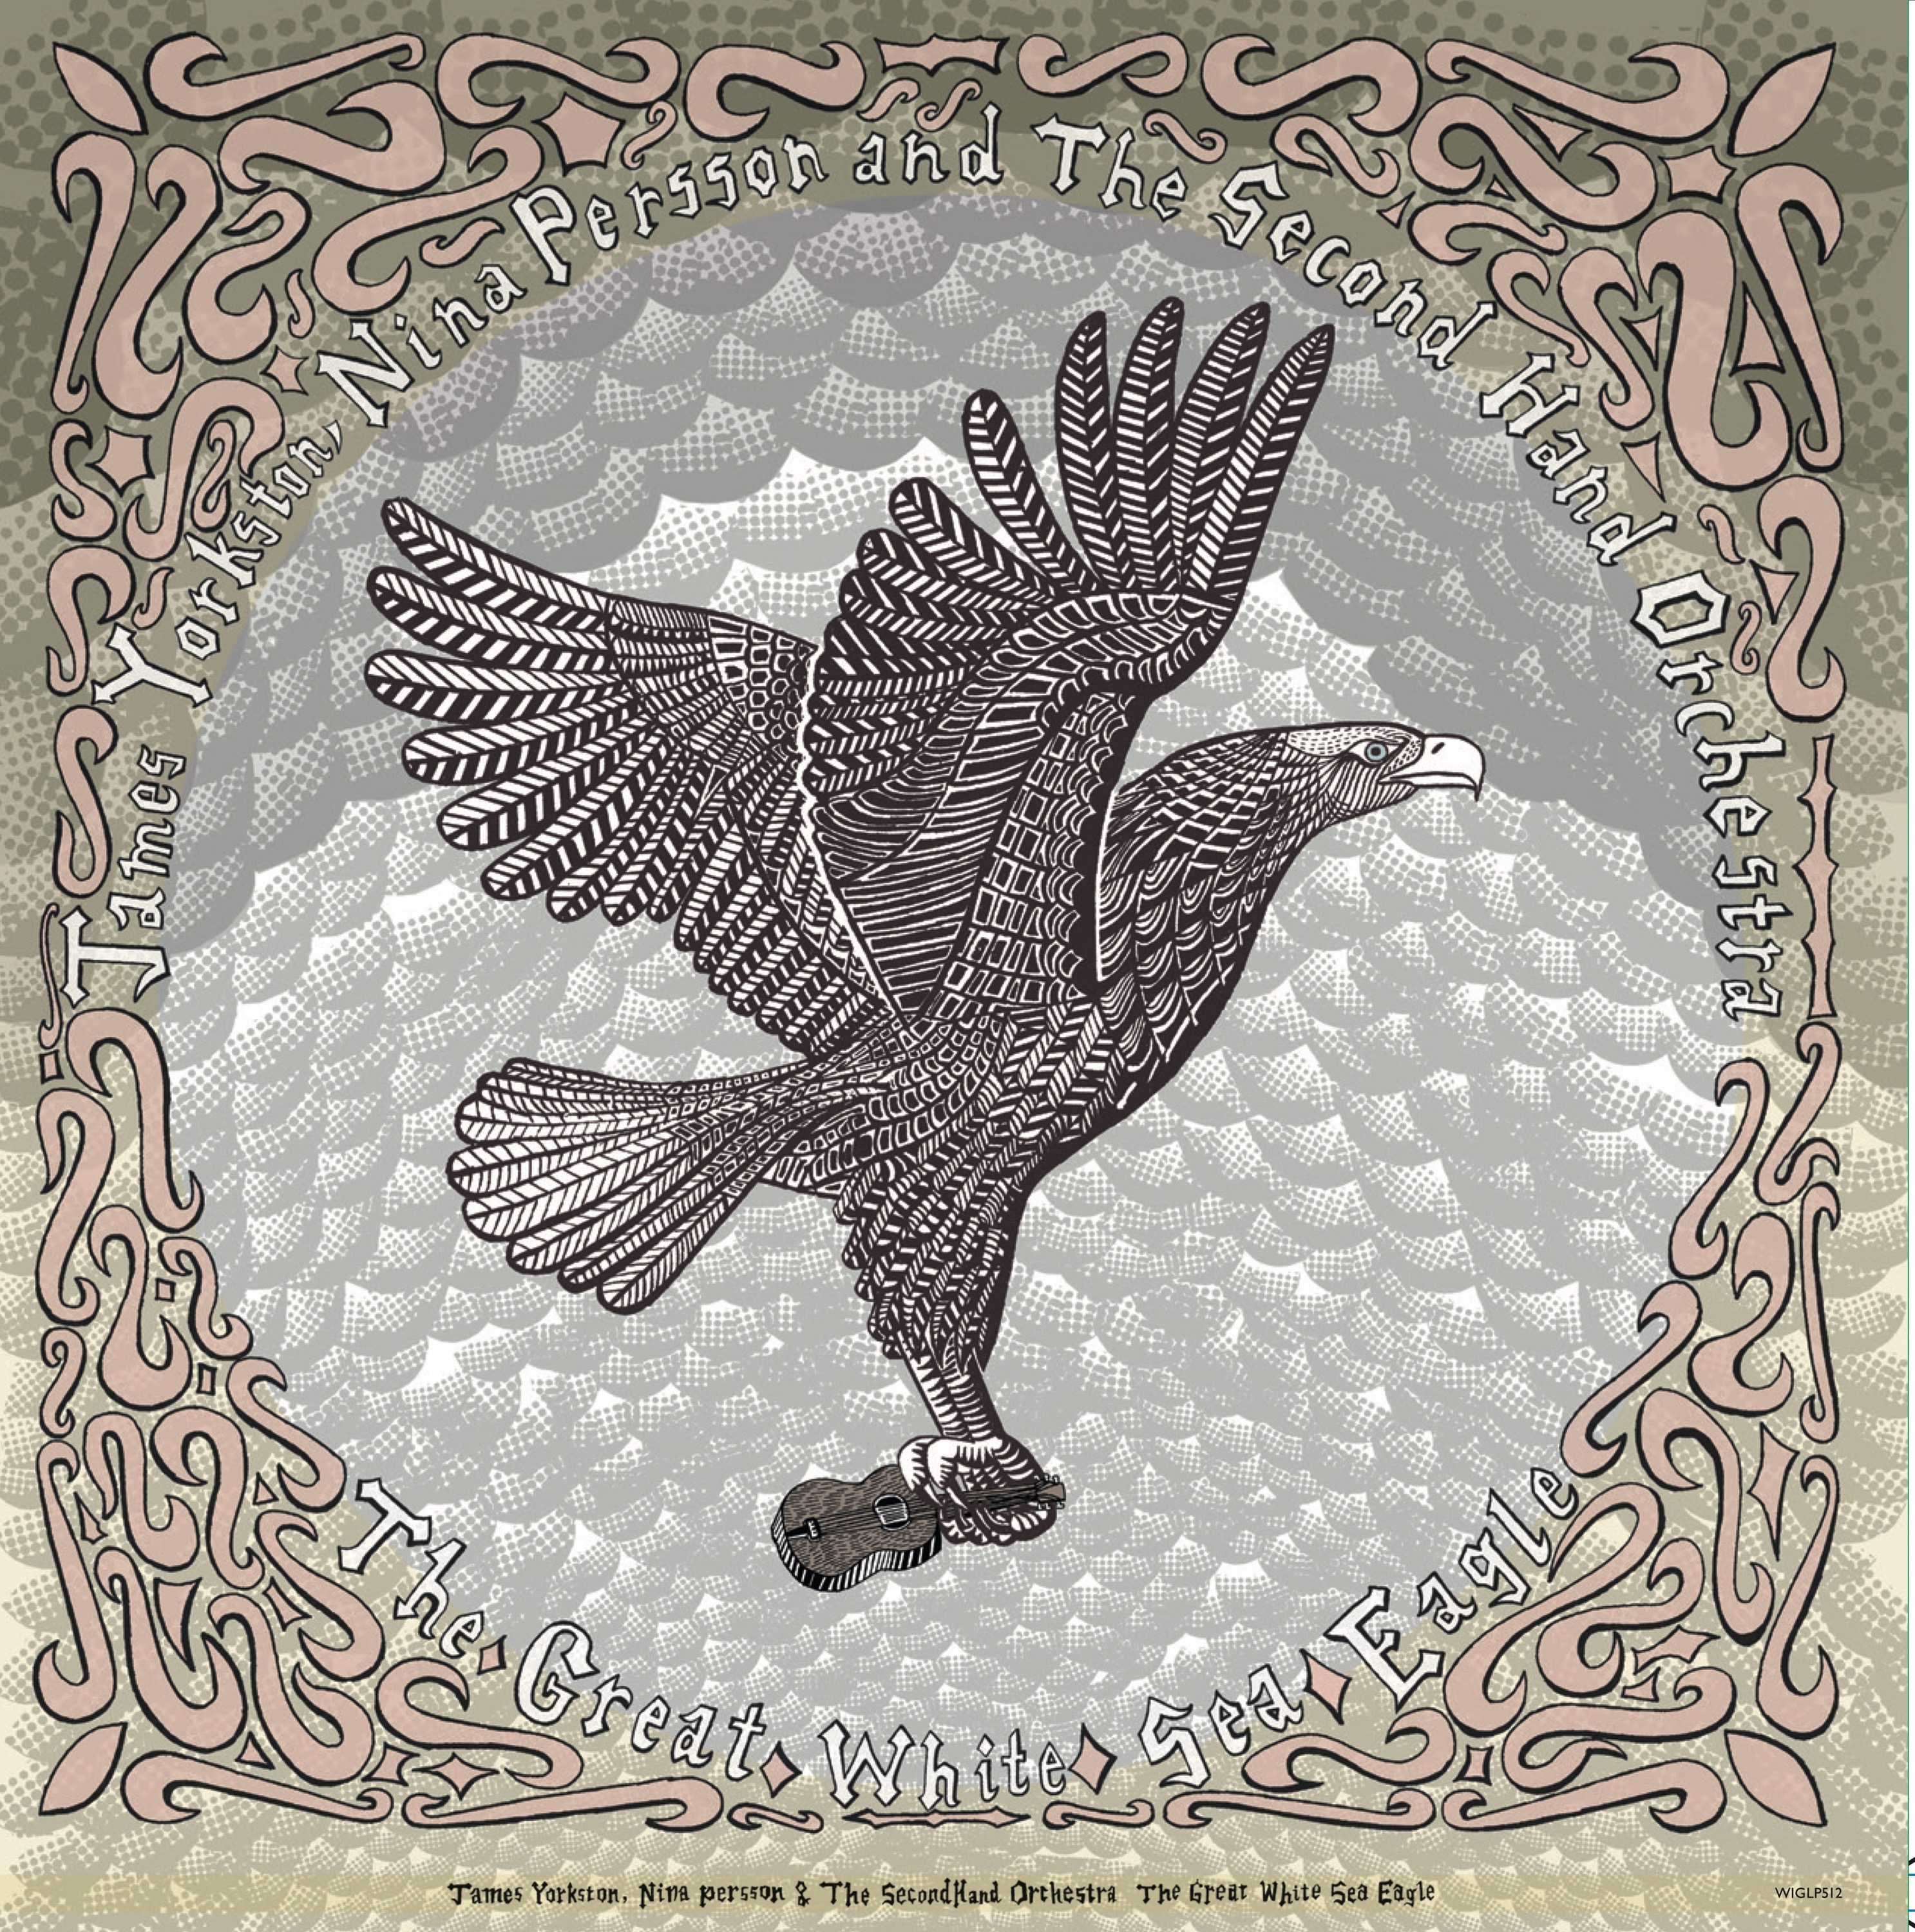 James Yorkston, Nina Persson and The Second Hand - The Great White Sea Eagle